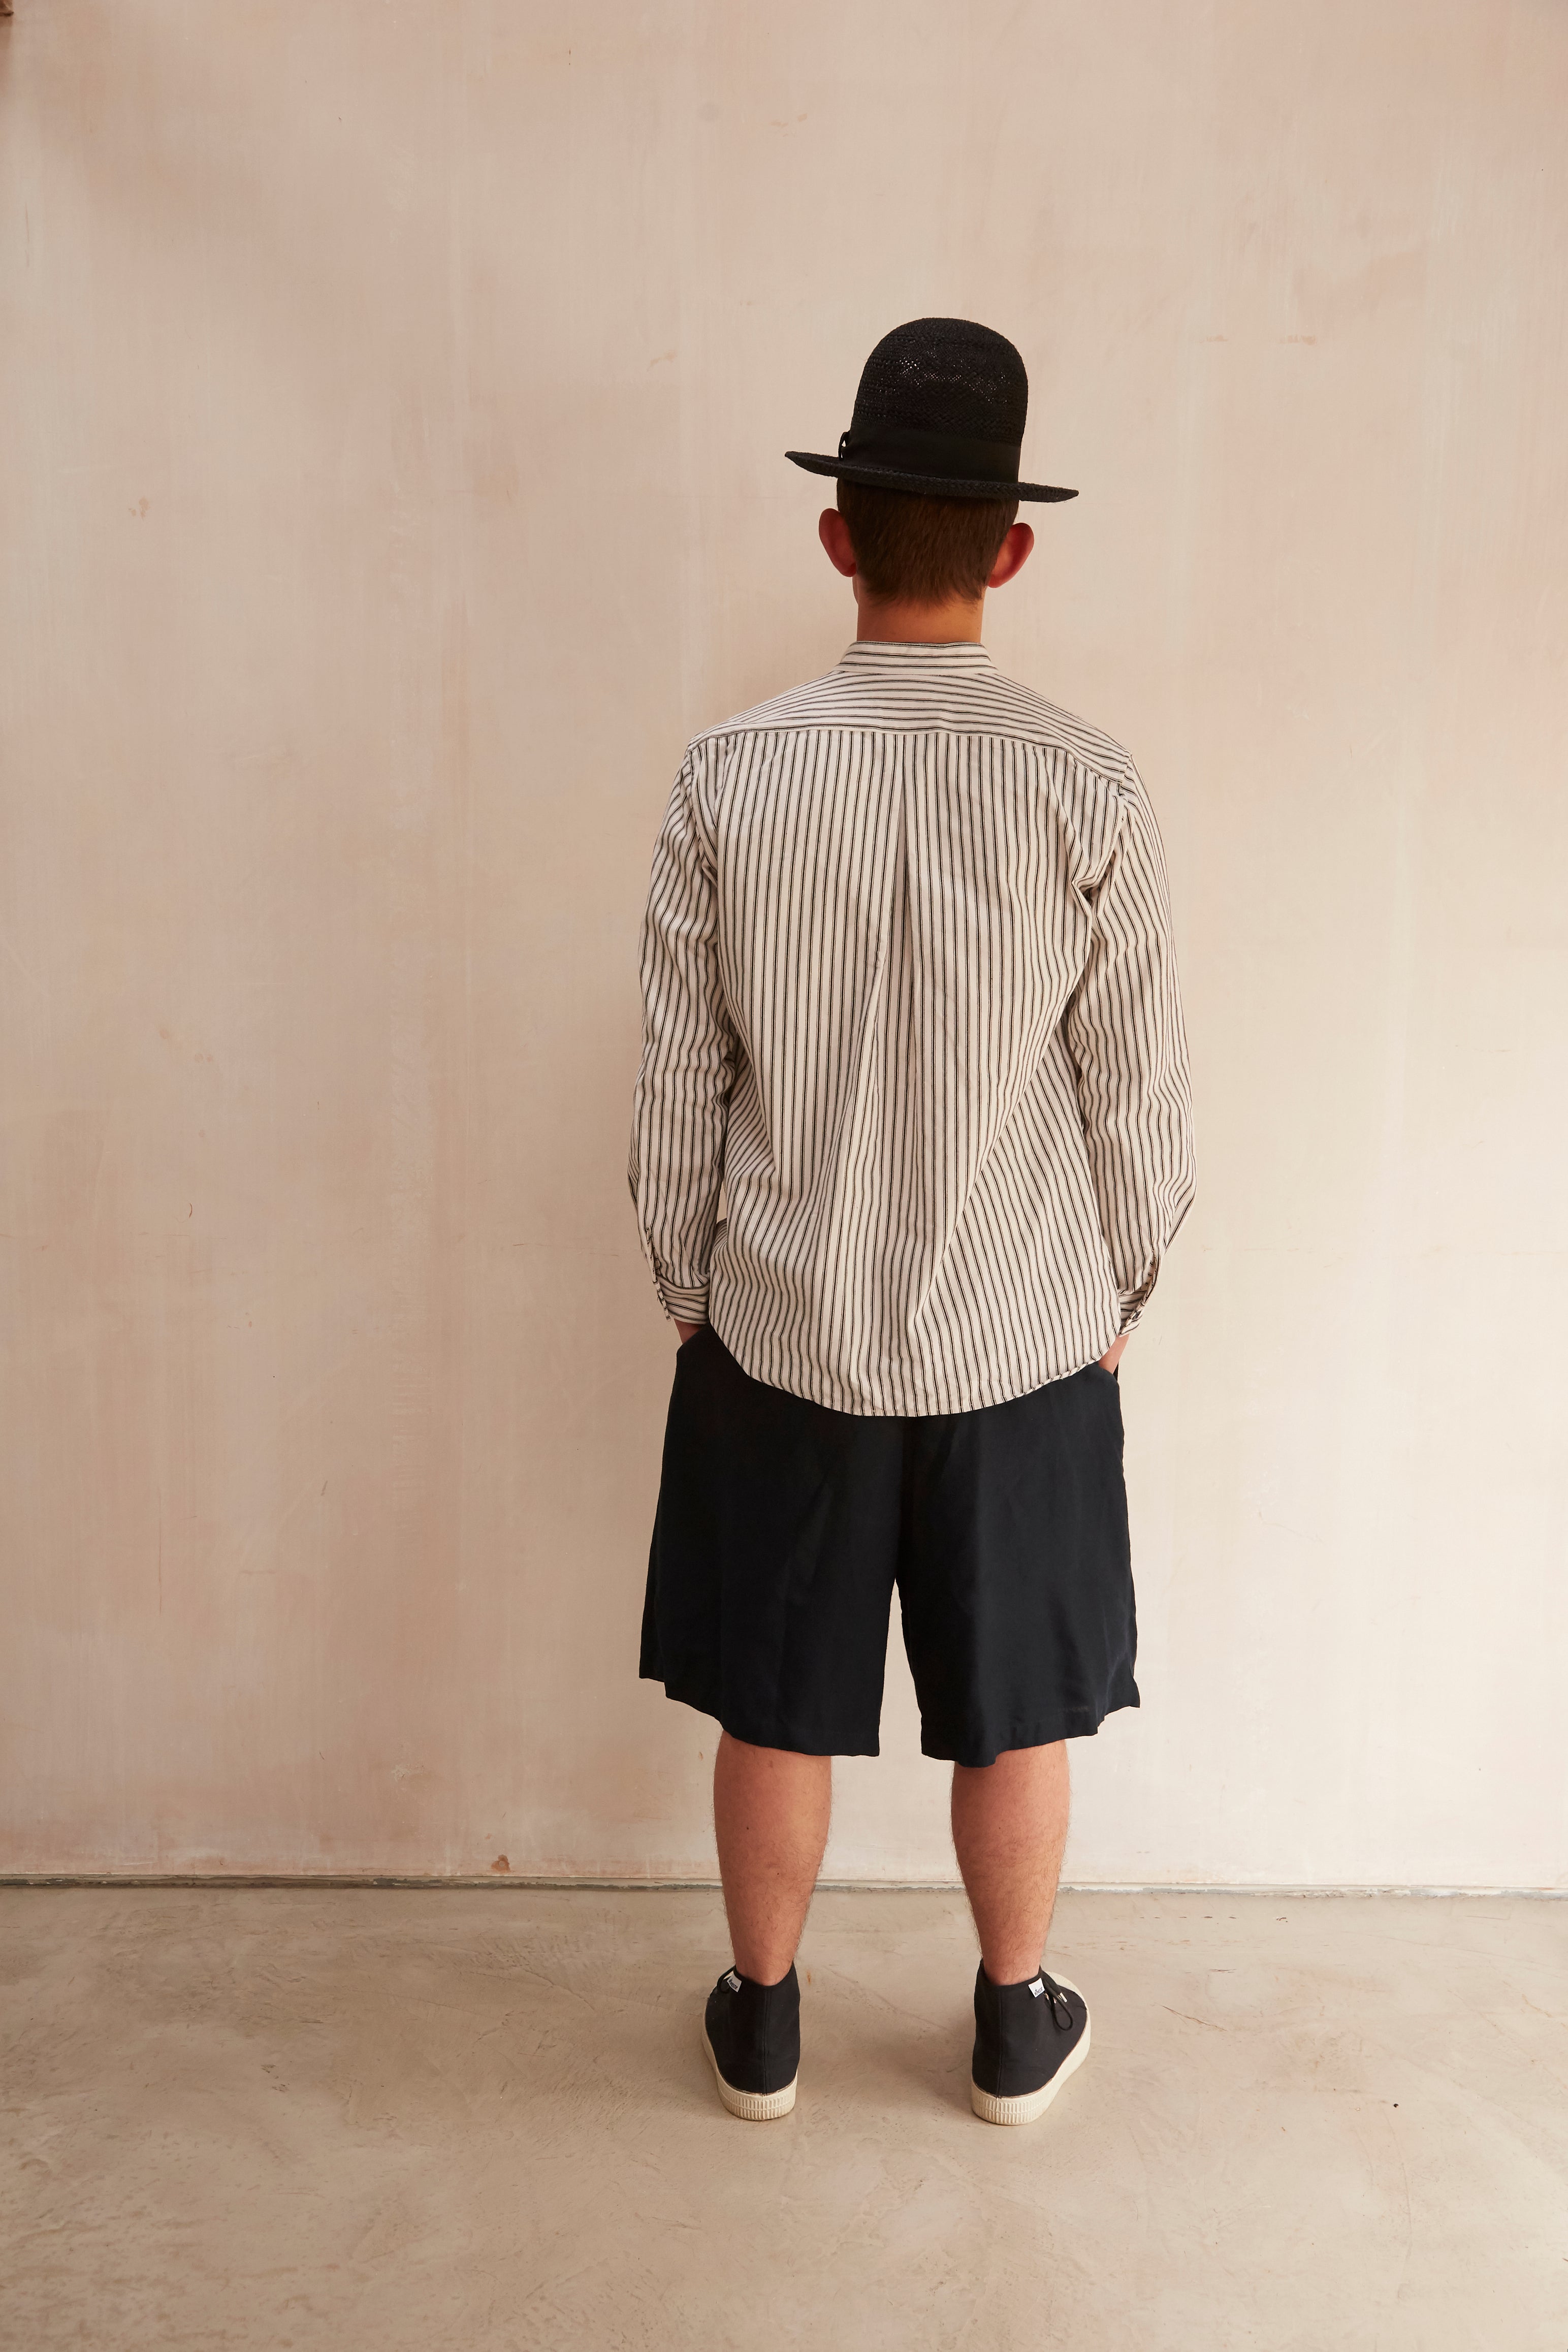 HACKNEY UNION WORKHOUSE - BED SHIRT - STRIPE